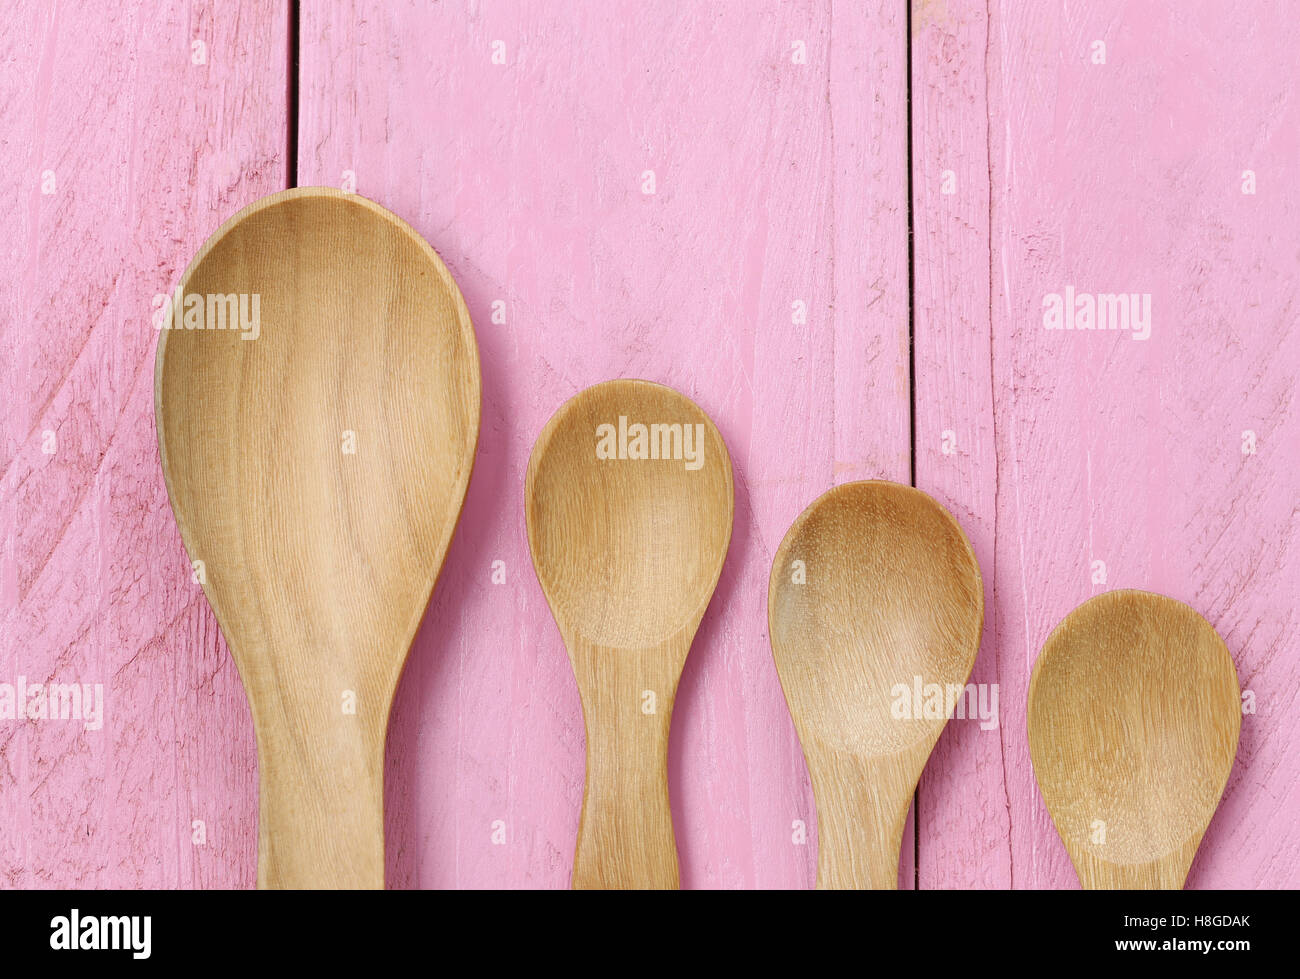 Wooden spoon on pink wood floors,concept of utensils and cooking. Stock Photo